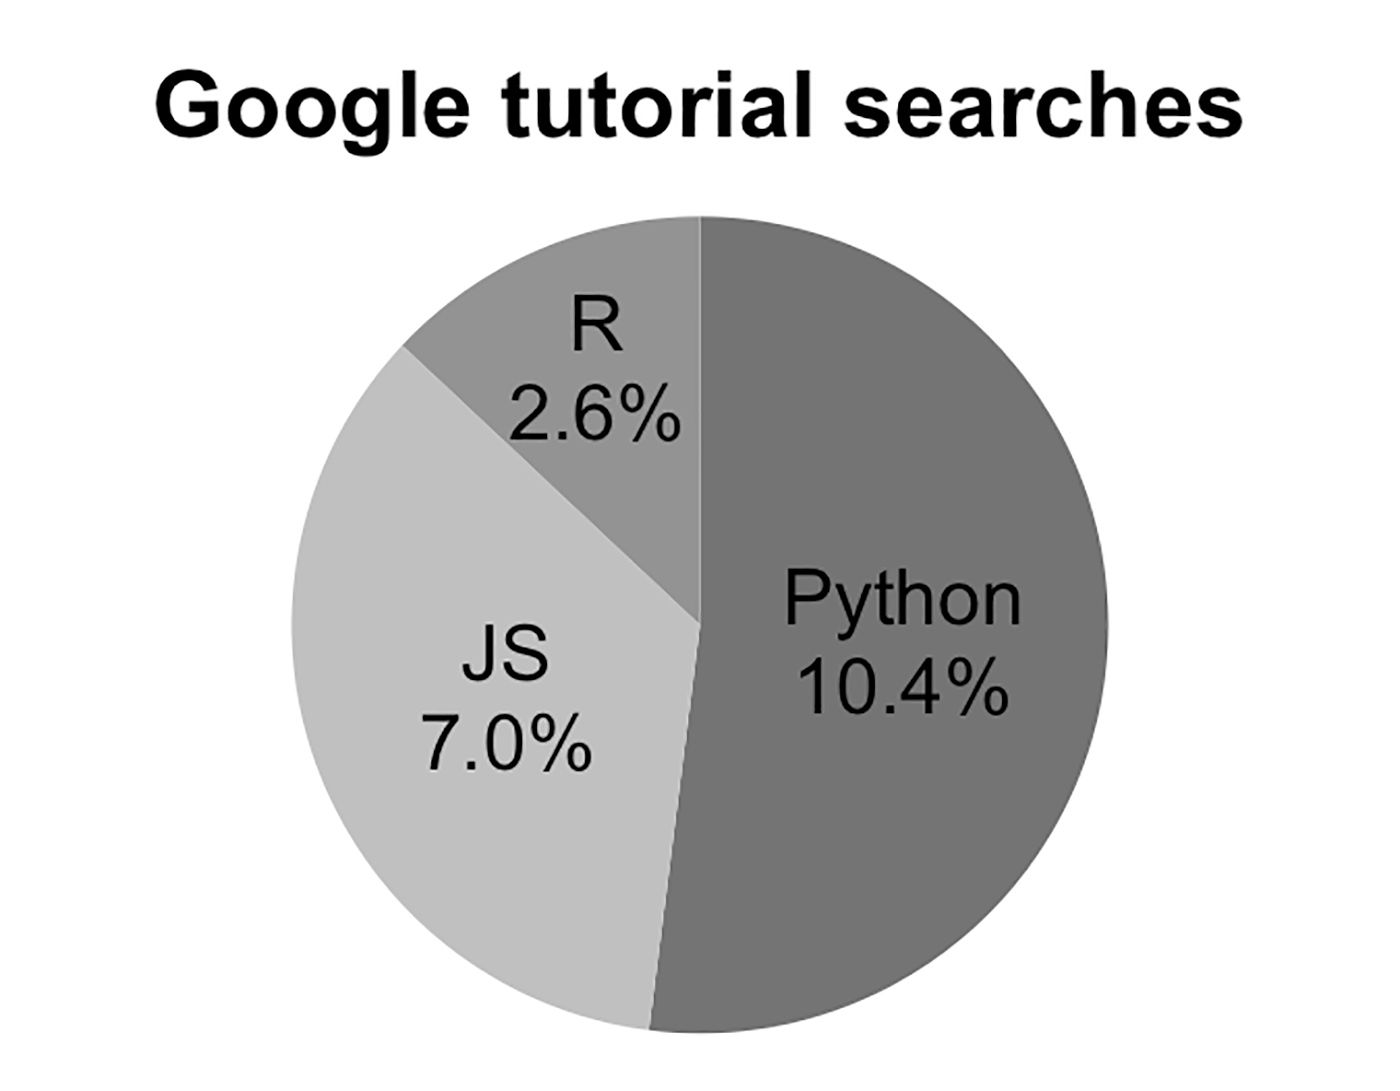 pie chart showing Google search frequency of popular programming languages